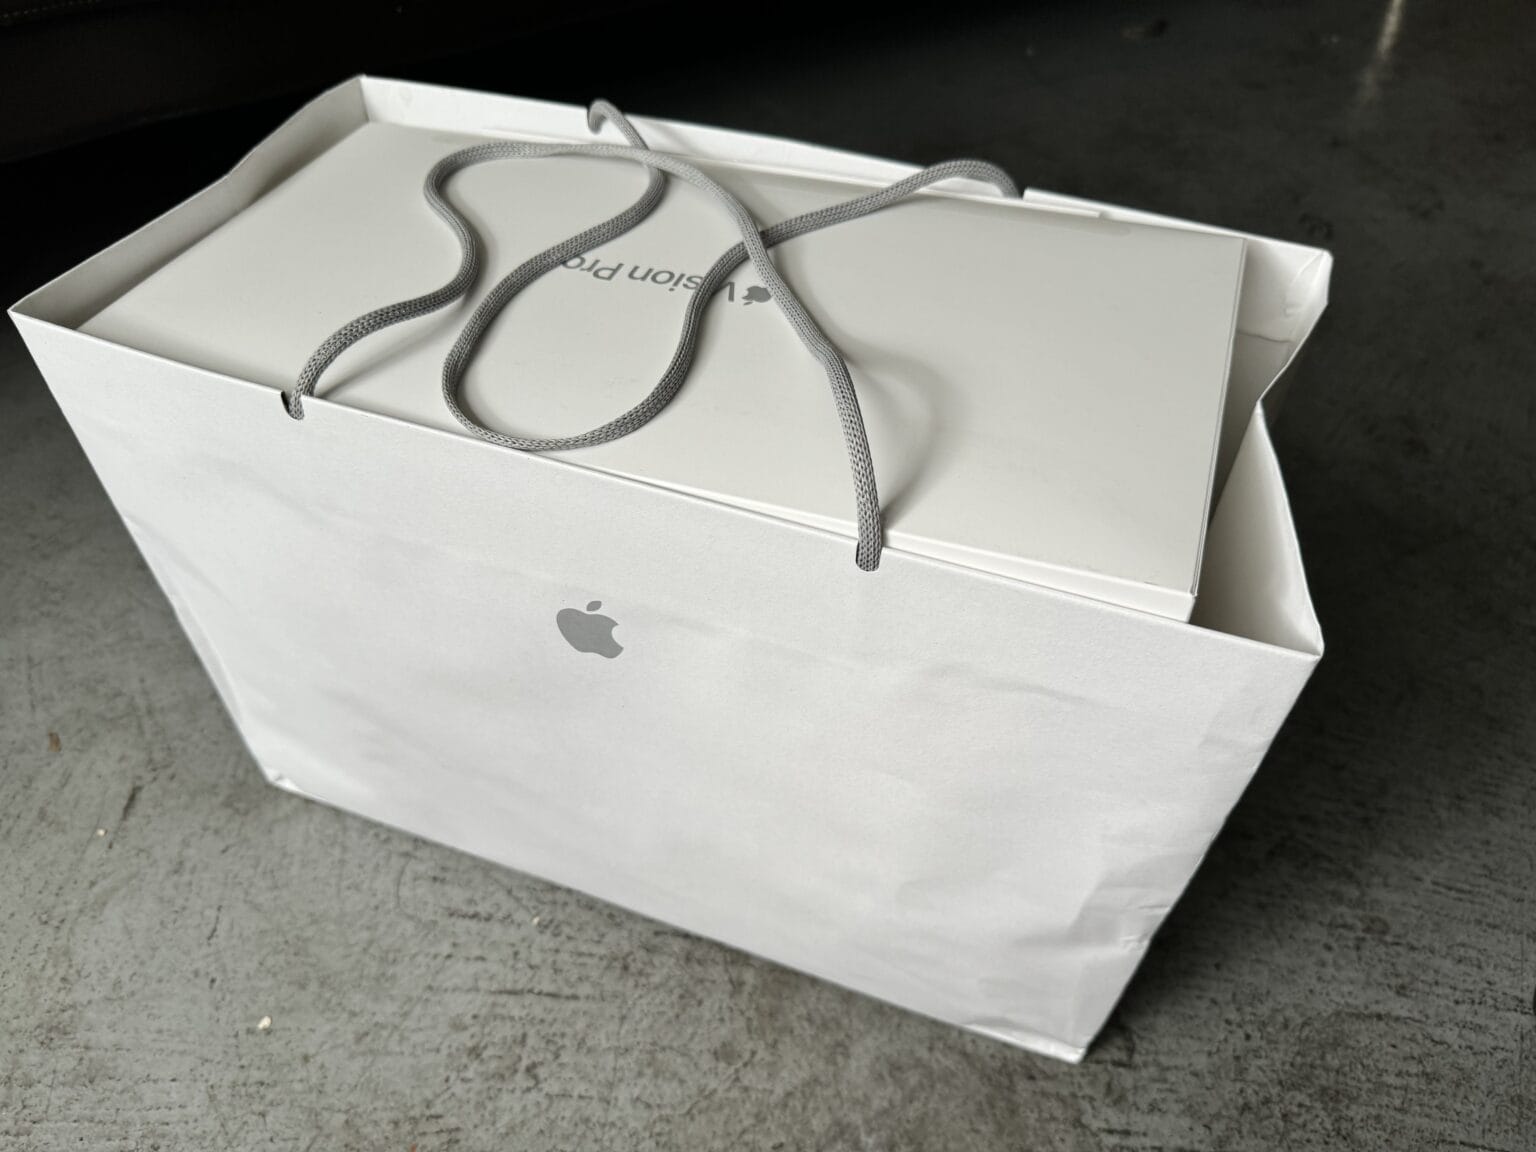 Apple Vision Pro box in a bag